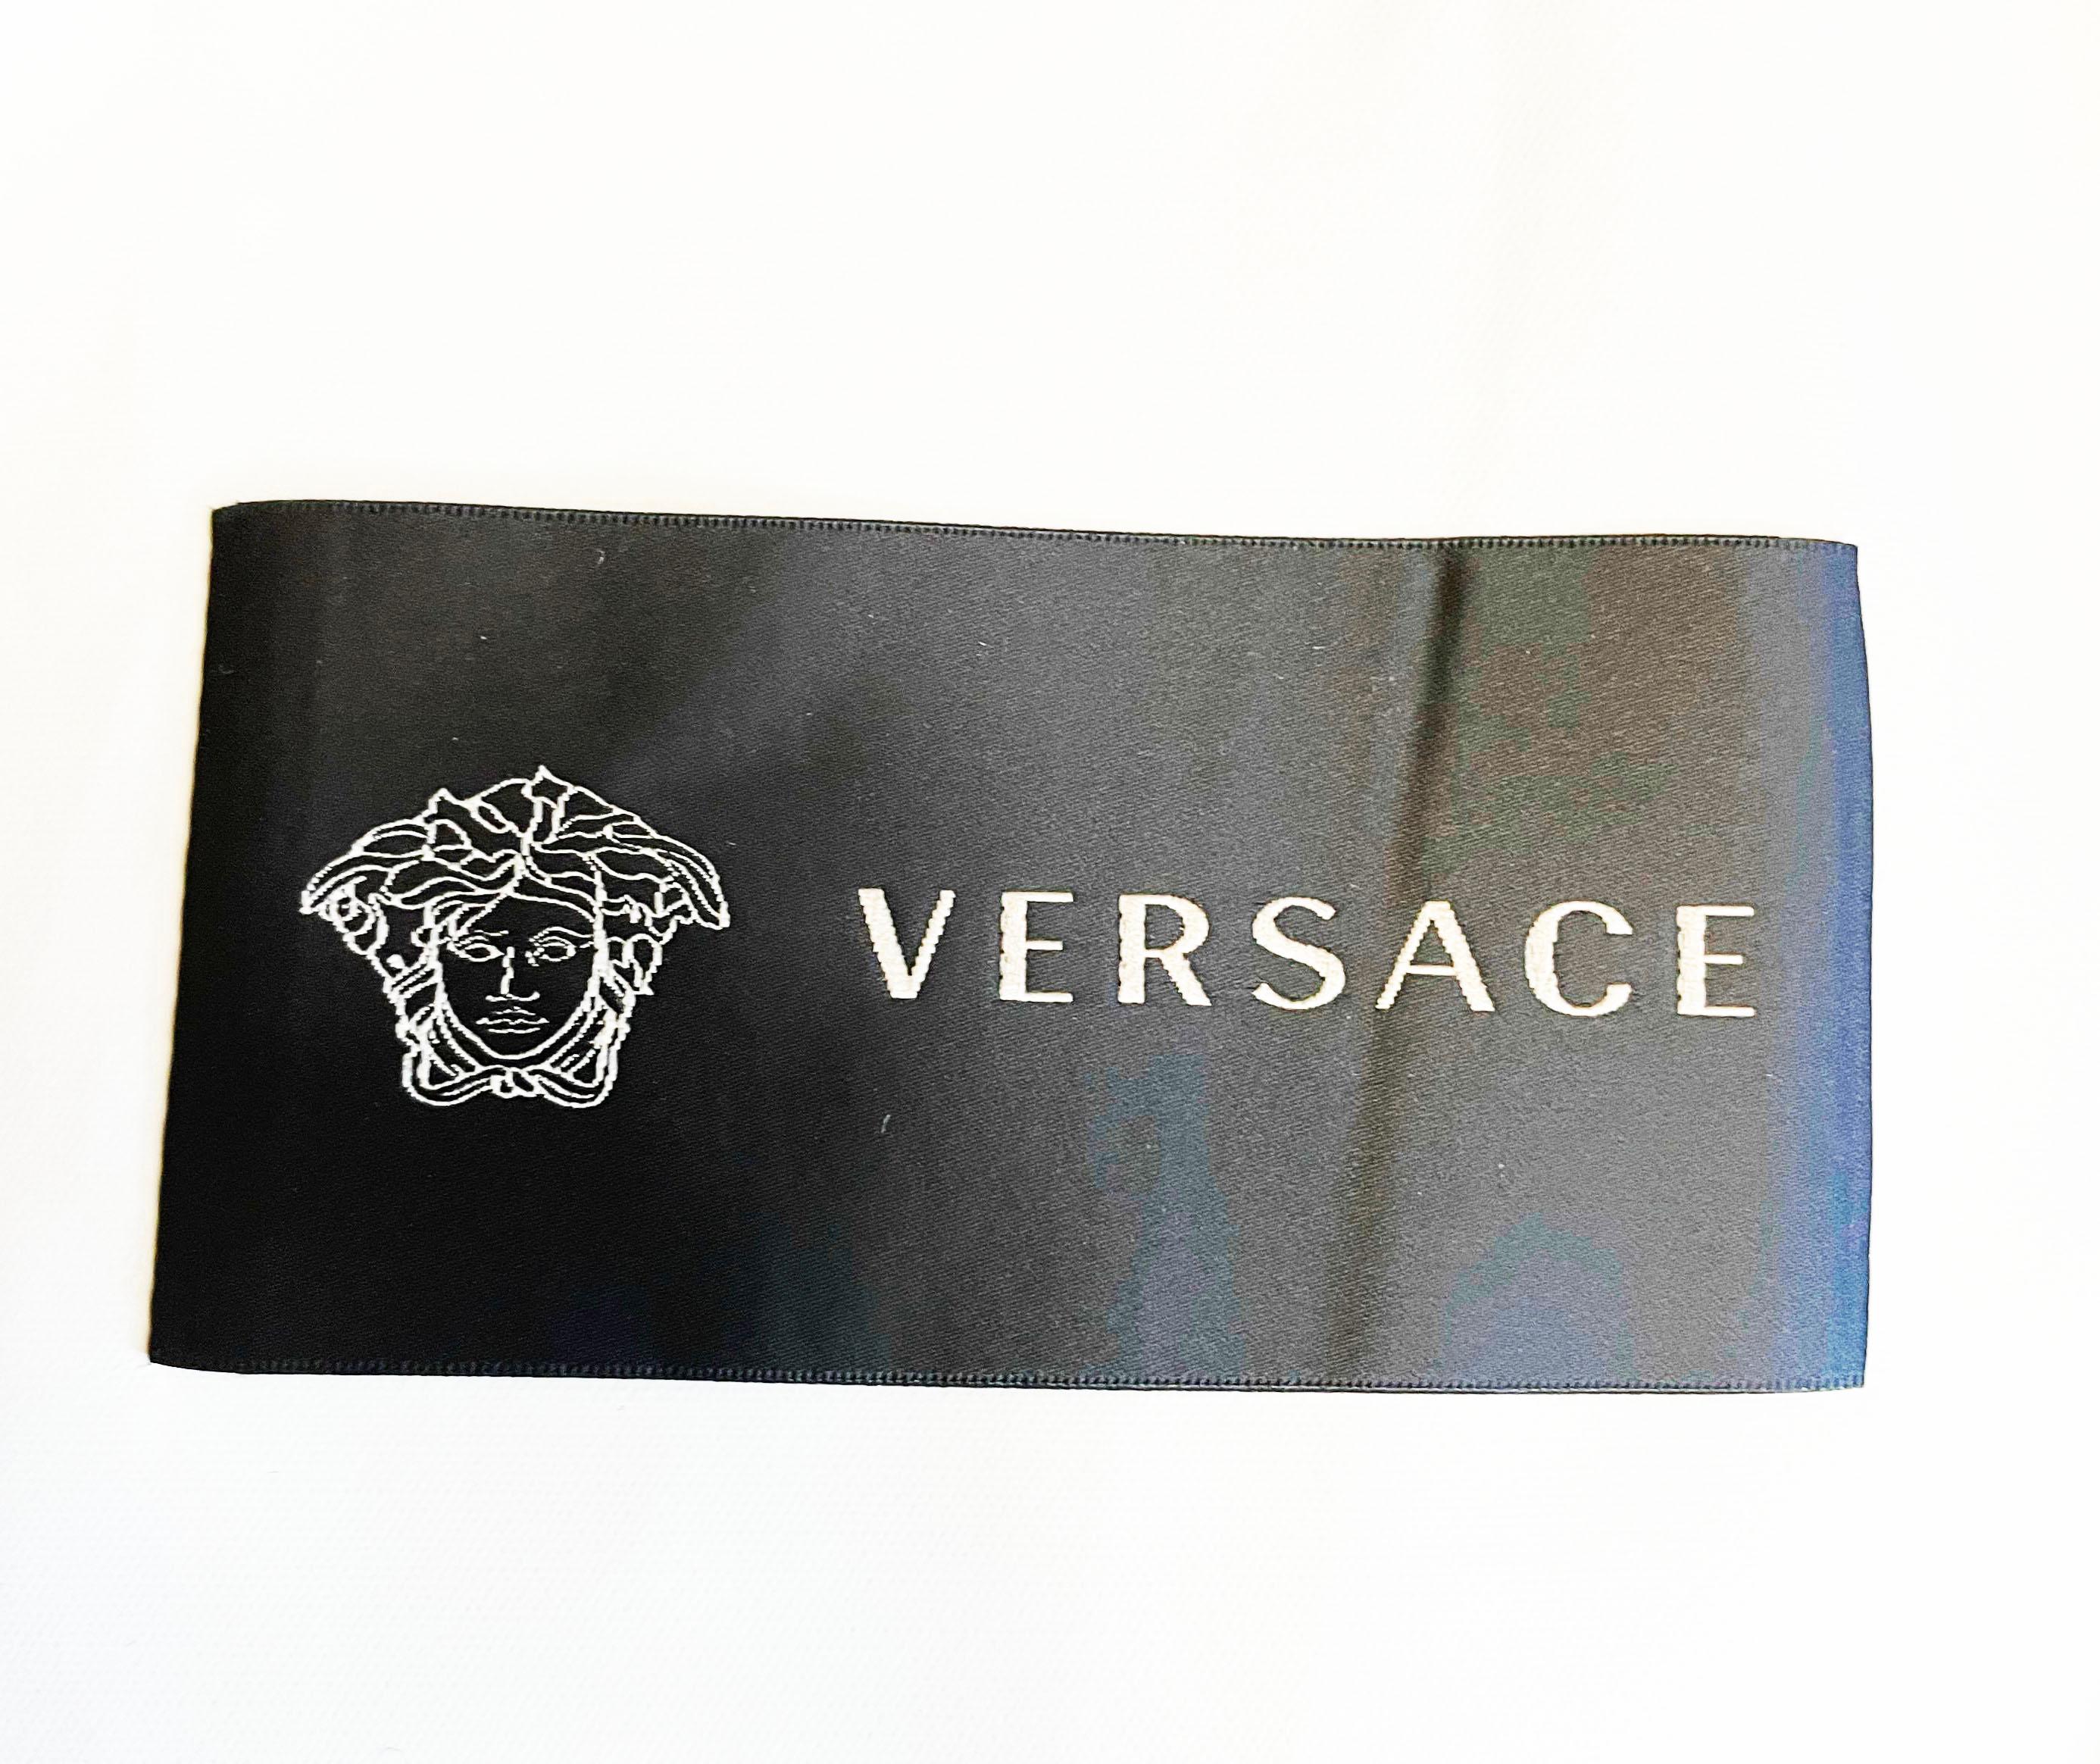 S/S 2016 L#17 NEW VERSACE BEIGE BOMBER JACKET with ZIPPER CLOSURE 50 - 40 For Sale 5